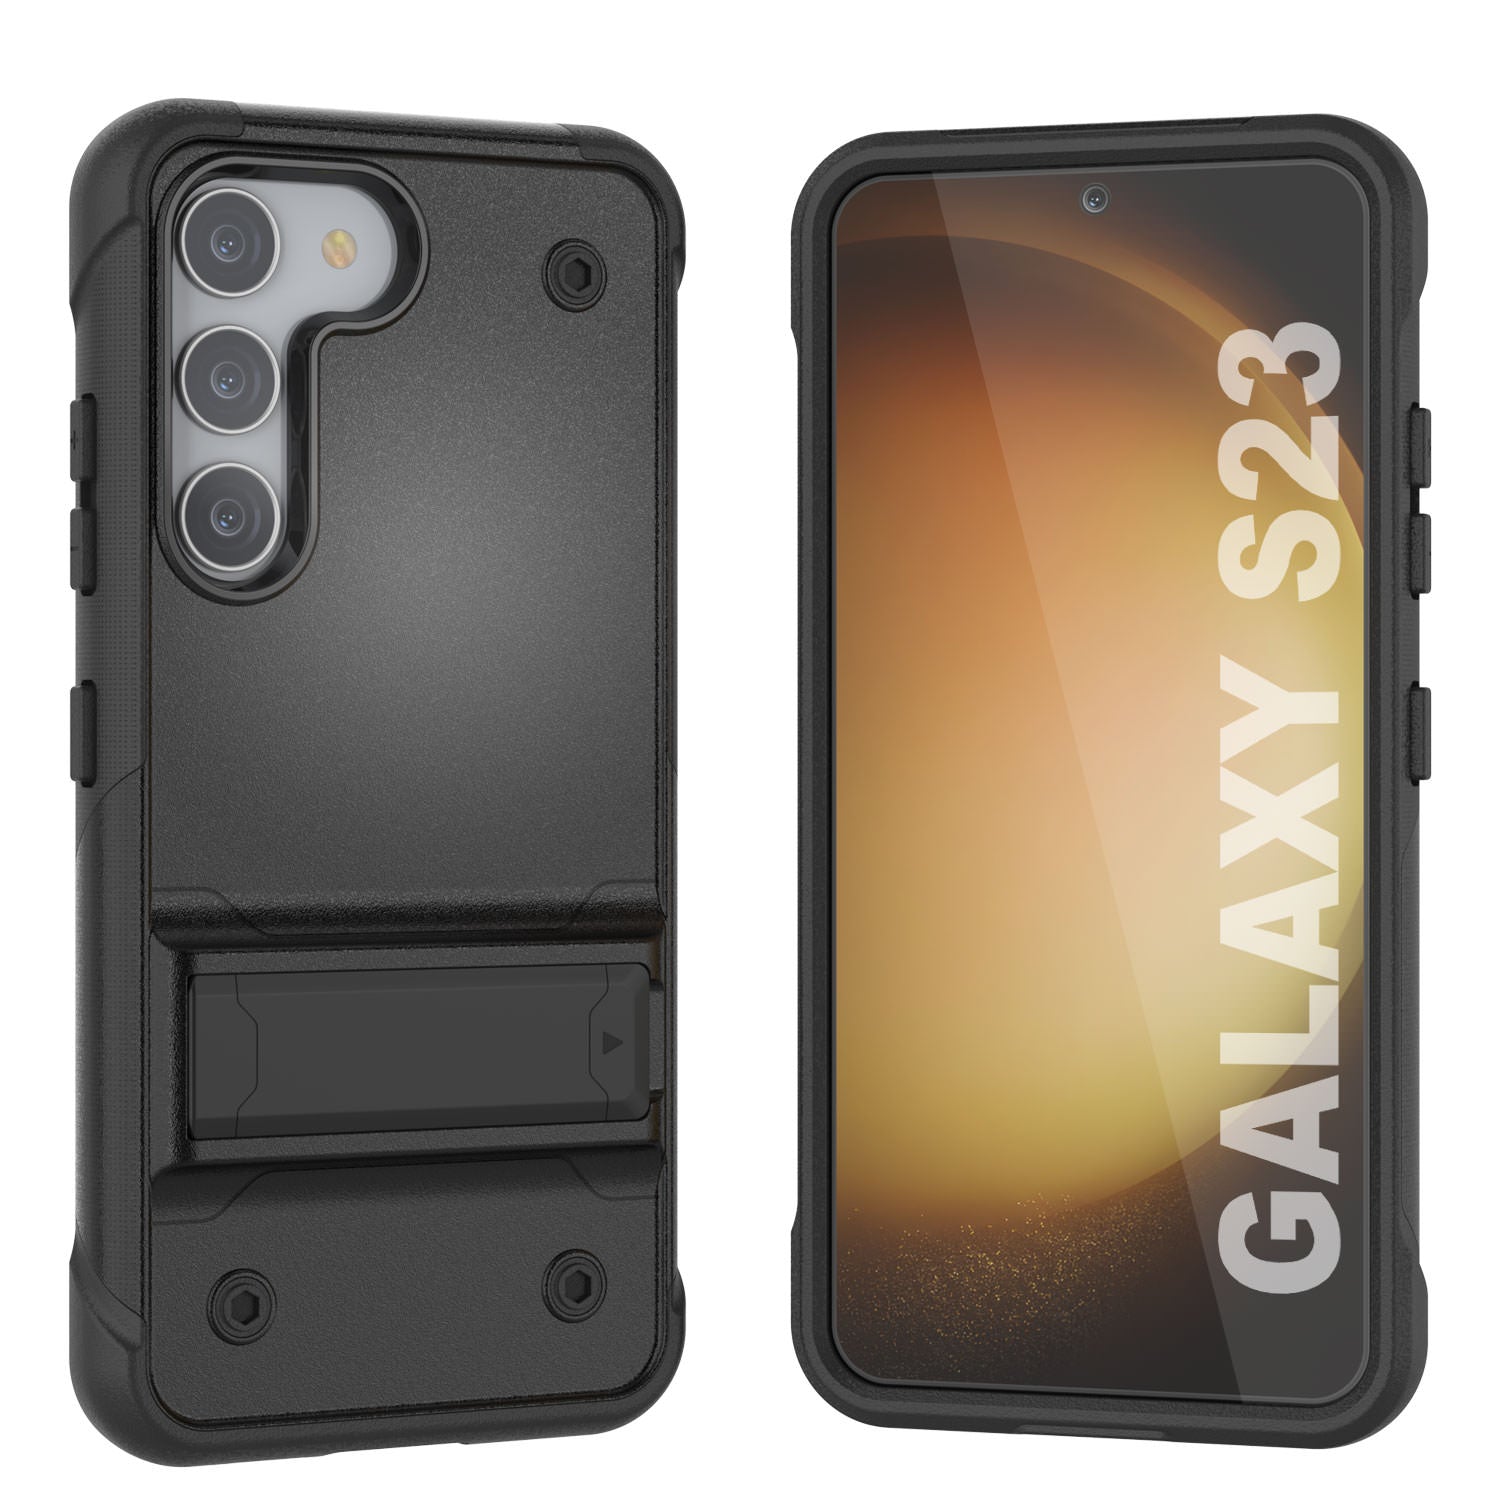 Punkcase Galaxy S23 Case [Reliance Series] Protective Hybrid Military Grade Cover W/Built-in Kickstand [Black]